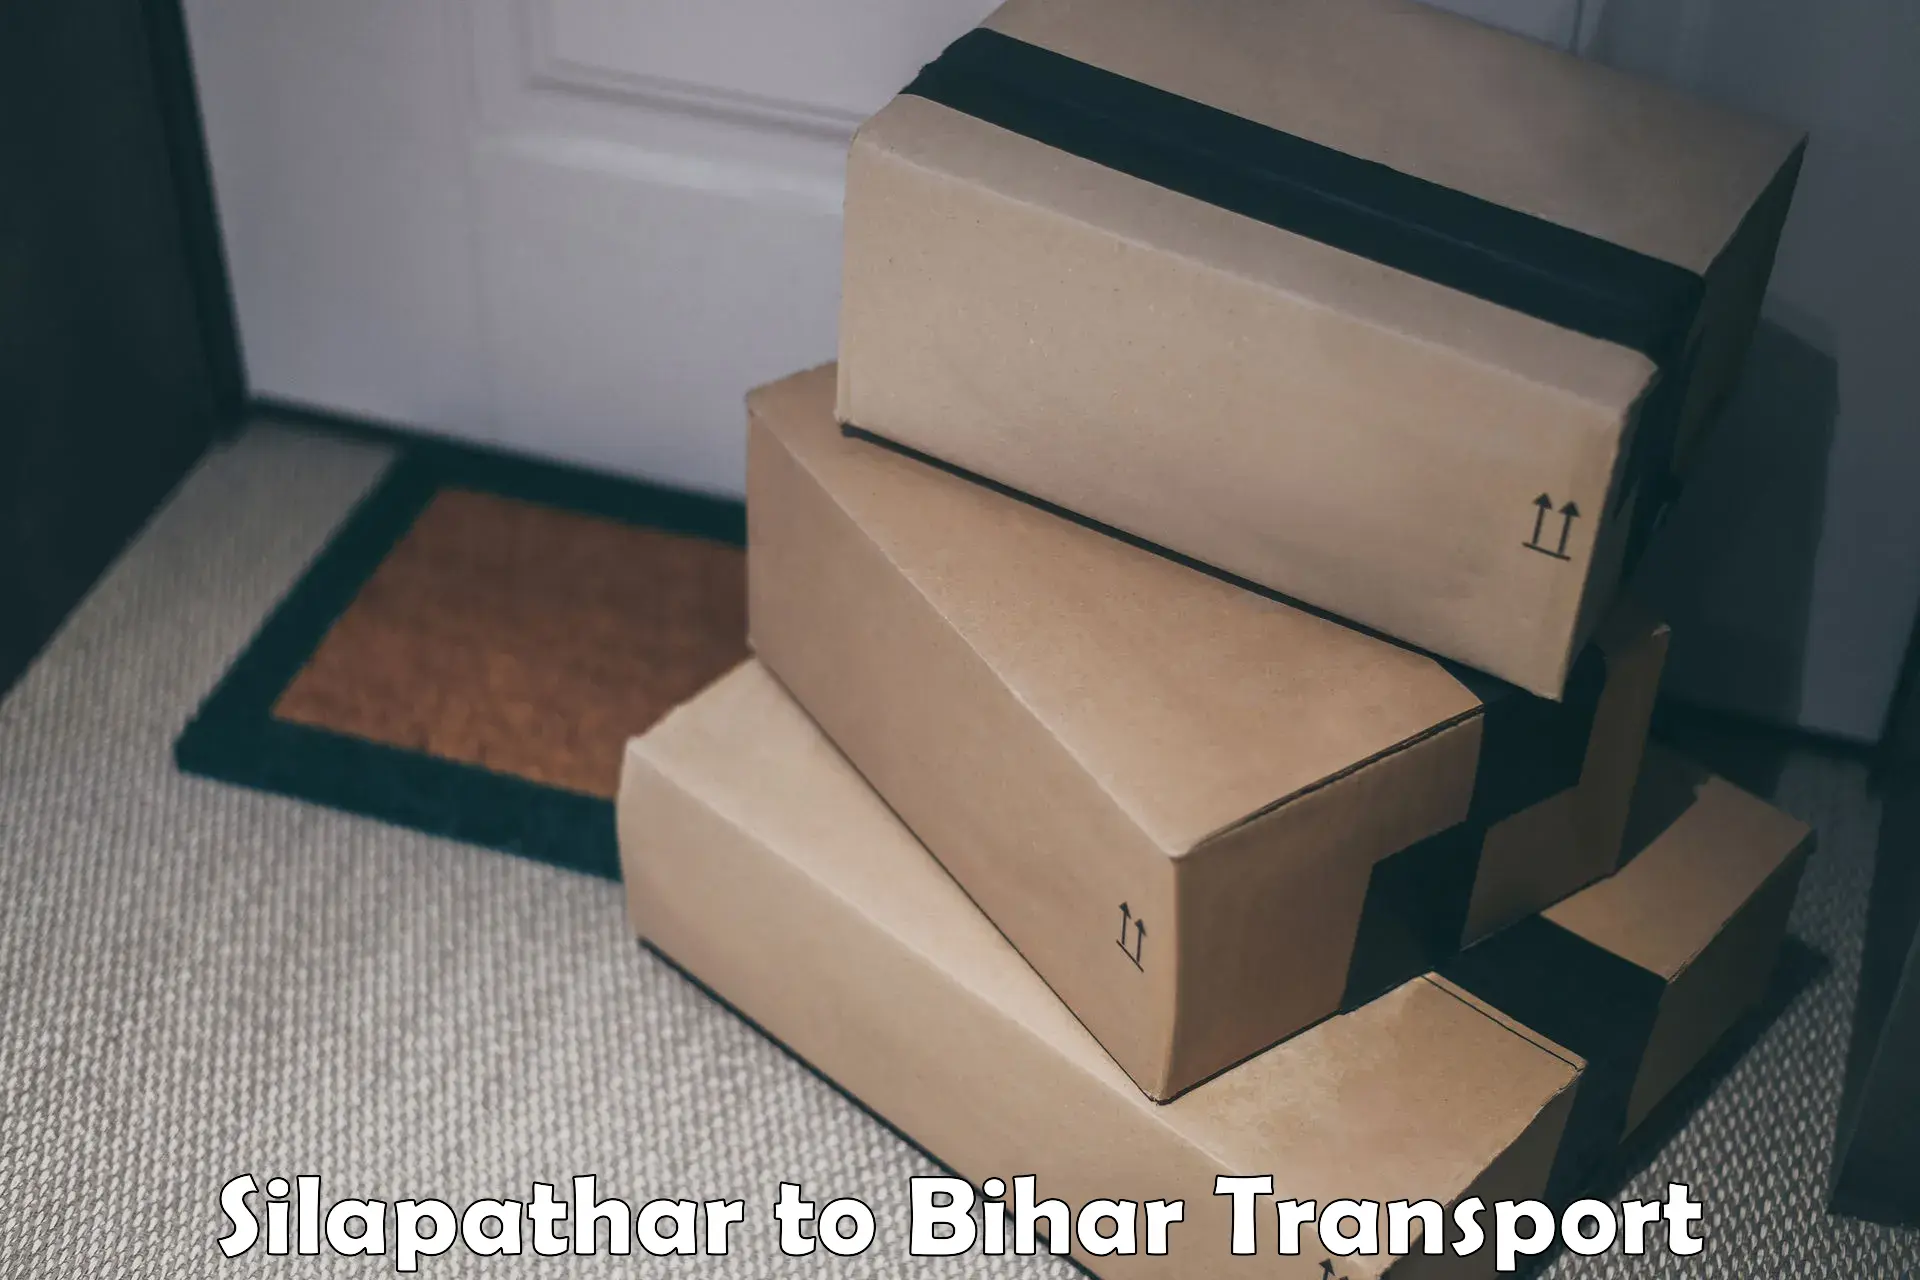 Best transport services in India Silapathar to Araria